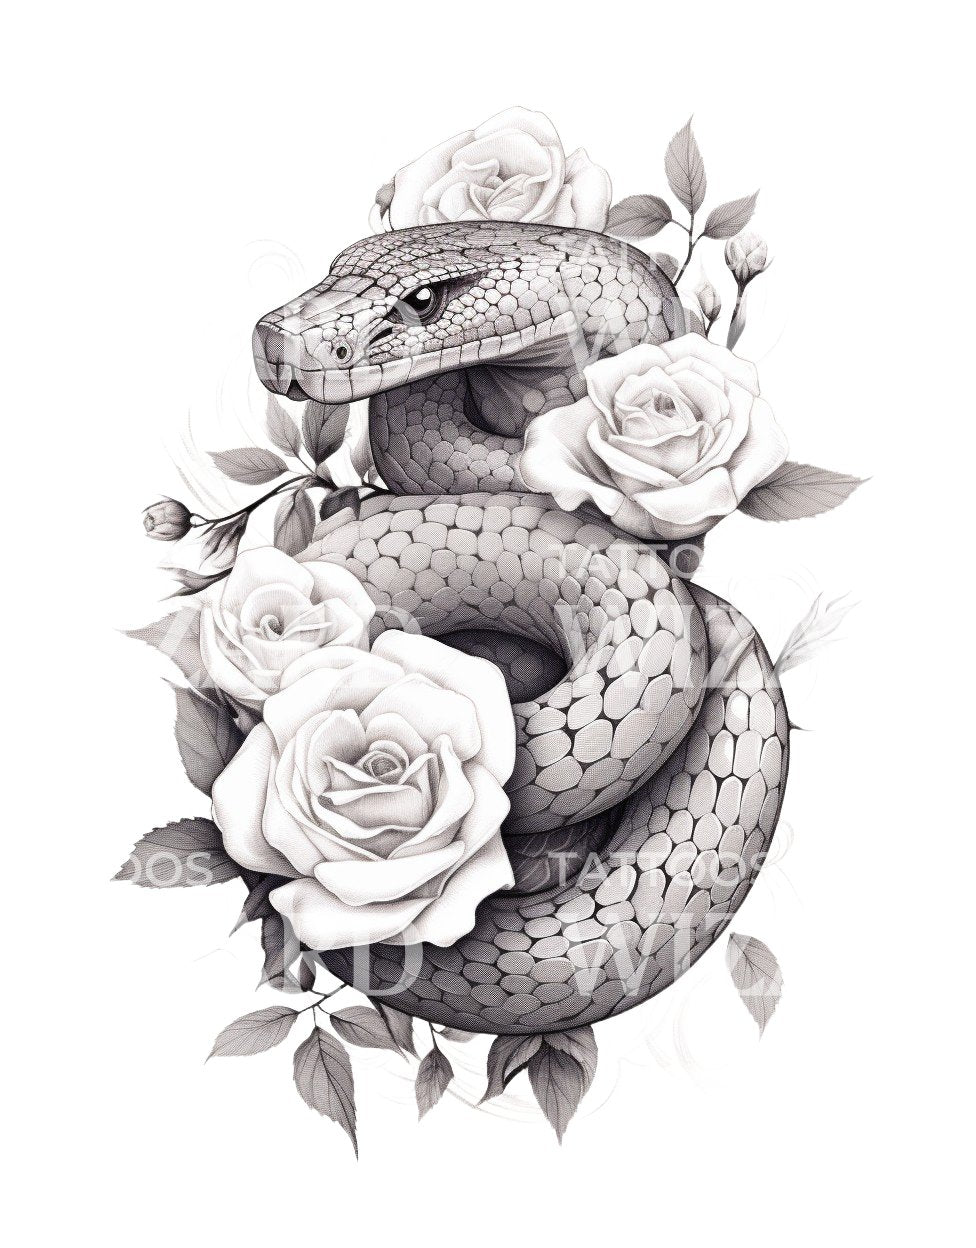 Snake with Roses Tattoo Design